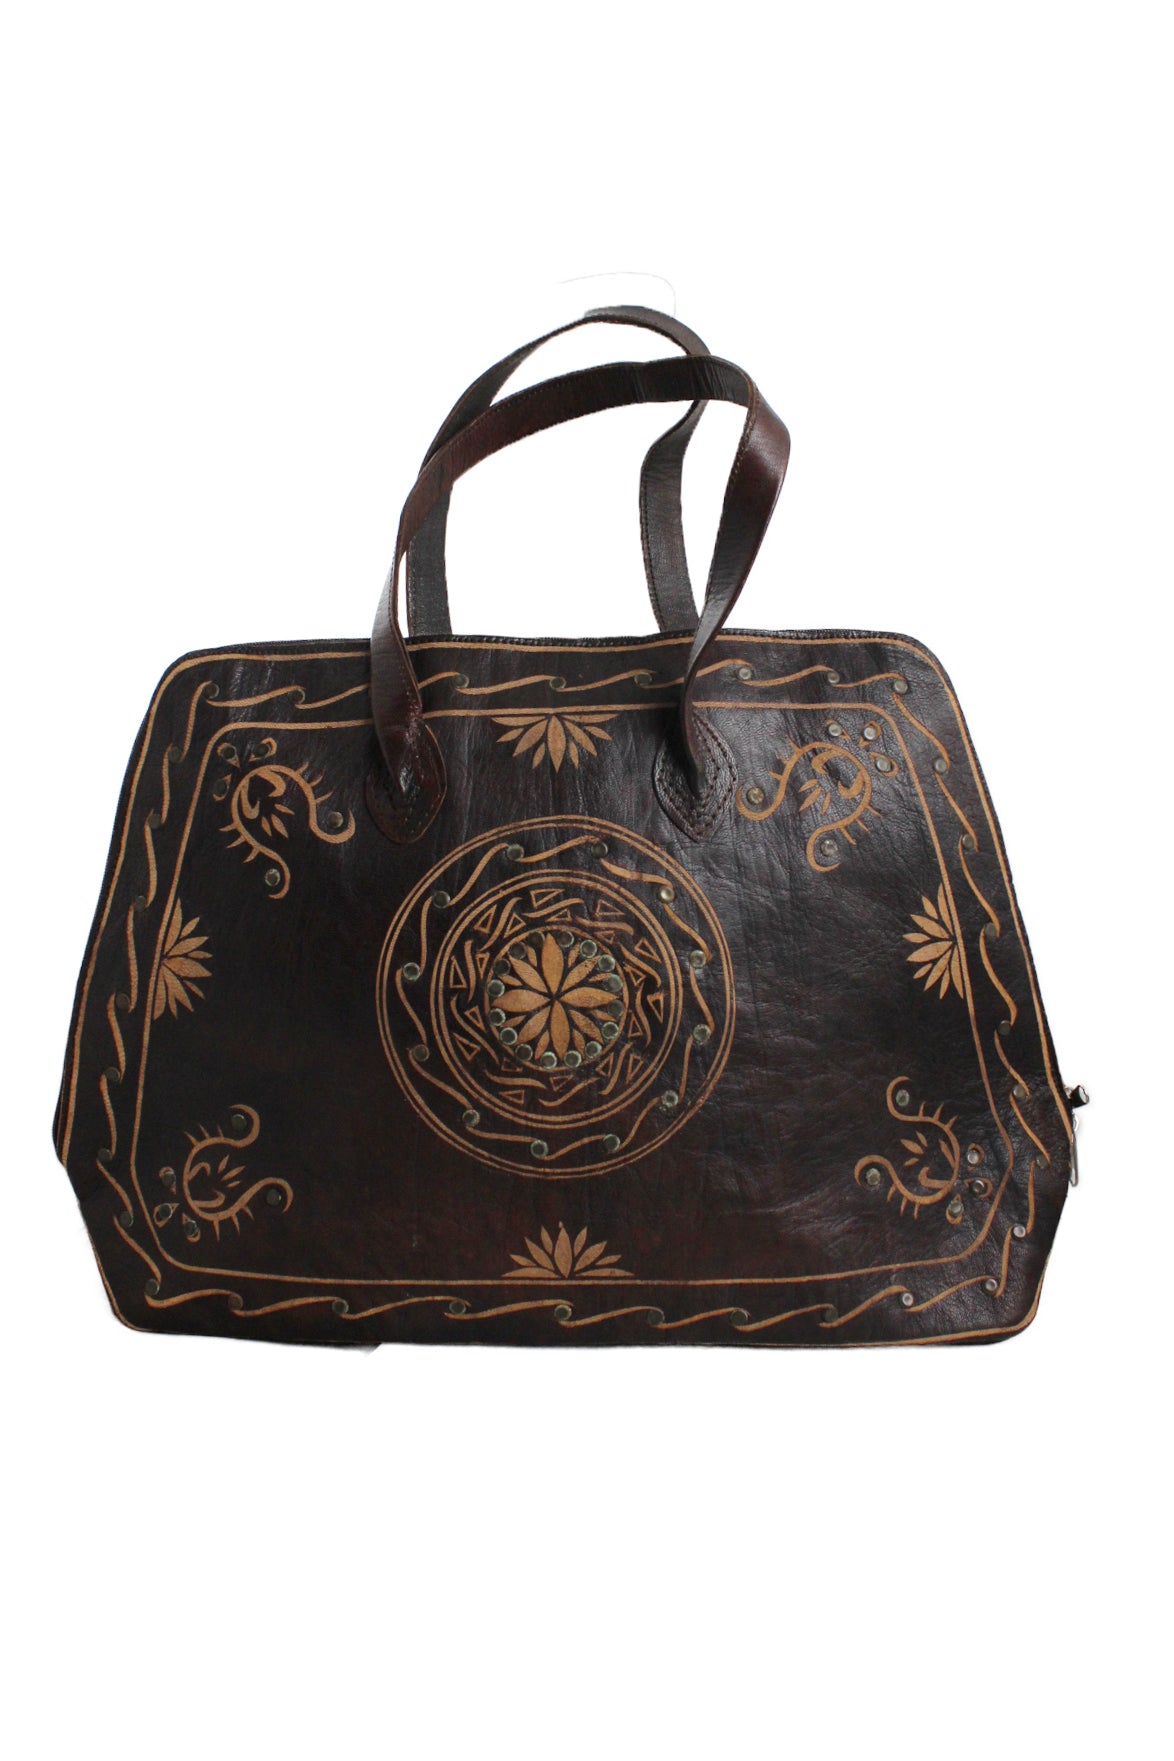 description: vintage unlabeled brown leather tote. features embossed floral design throughout, double strap, fully lined, interior slit pocket and zipper closure at top. 